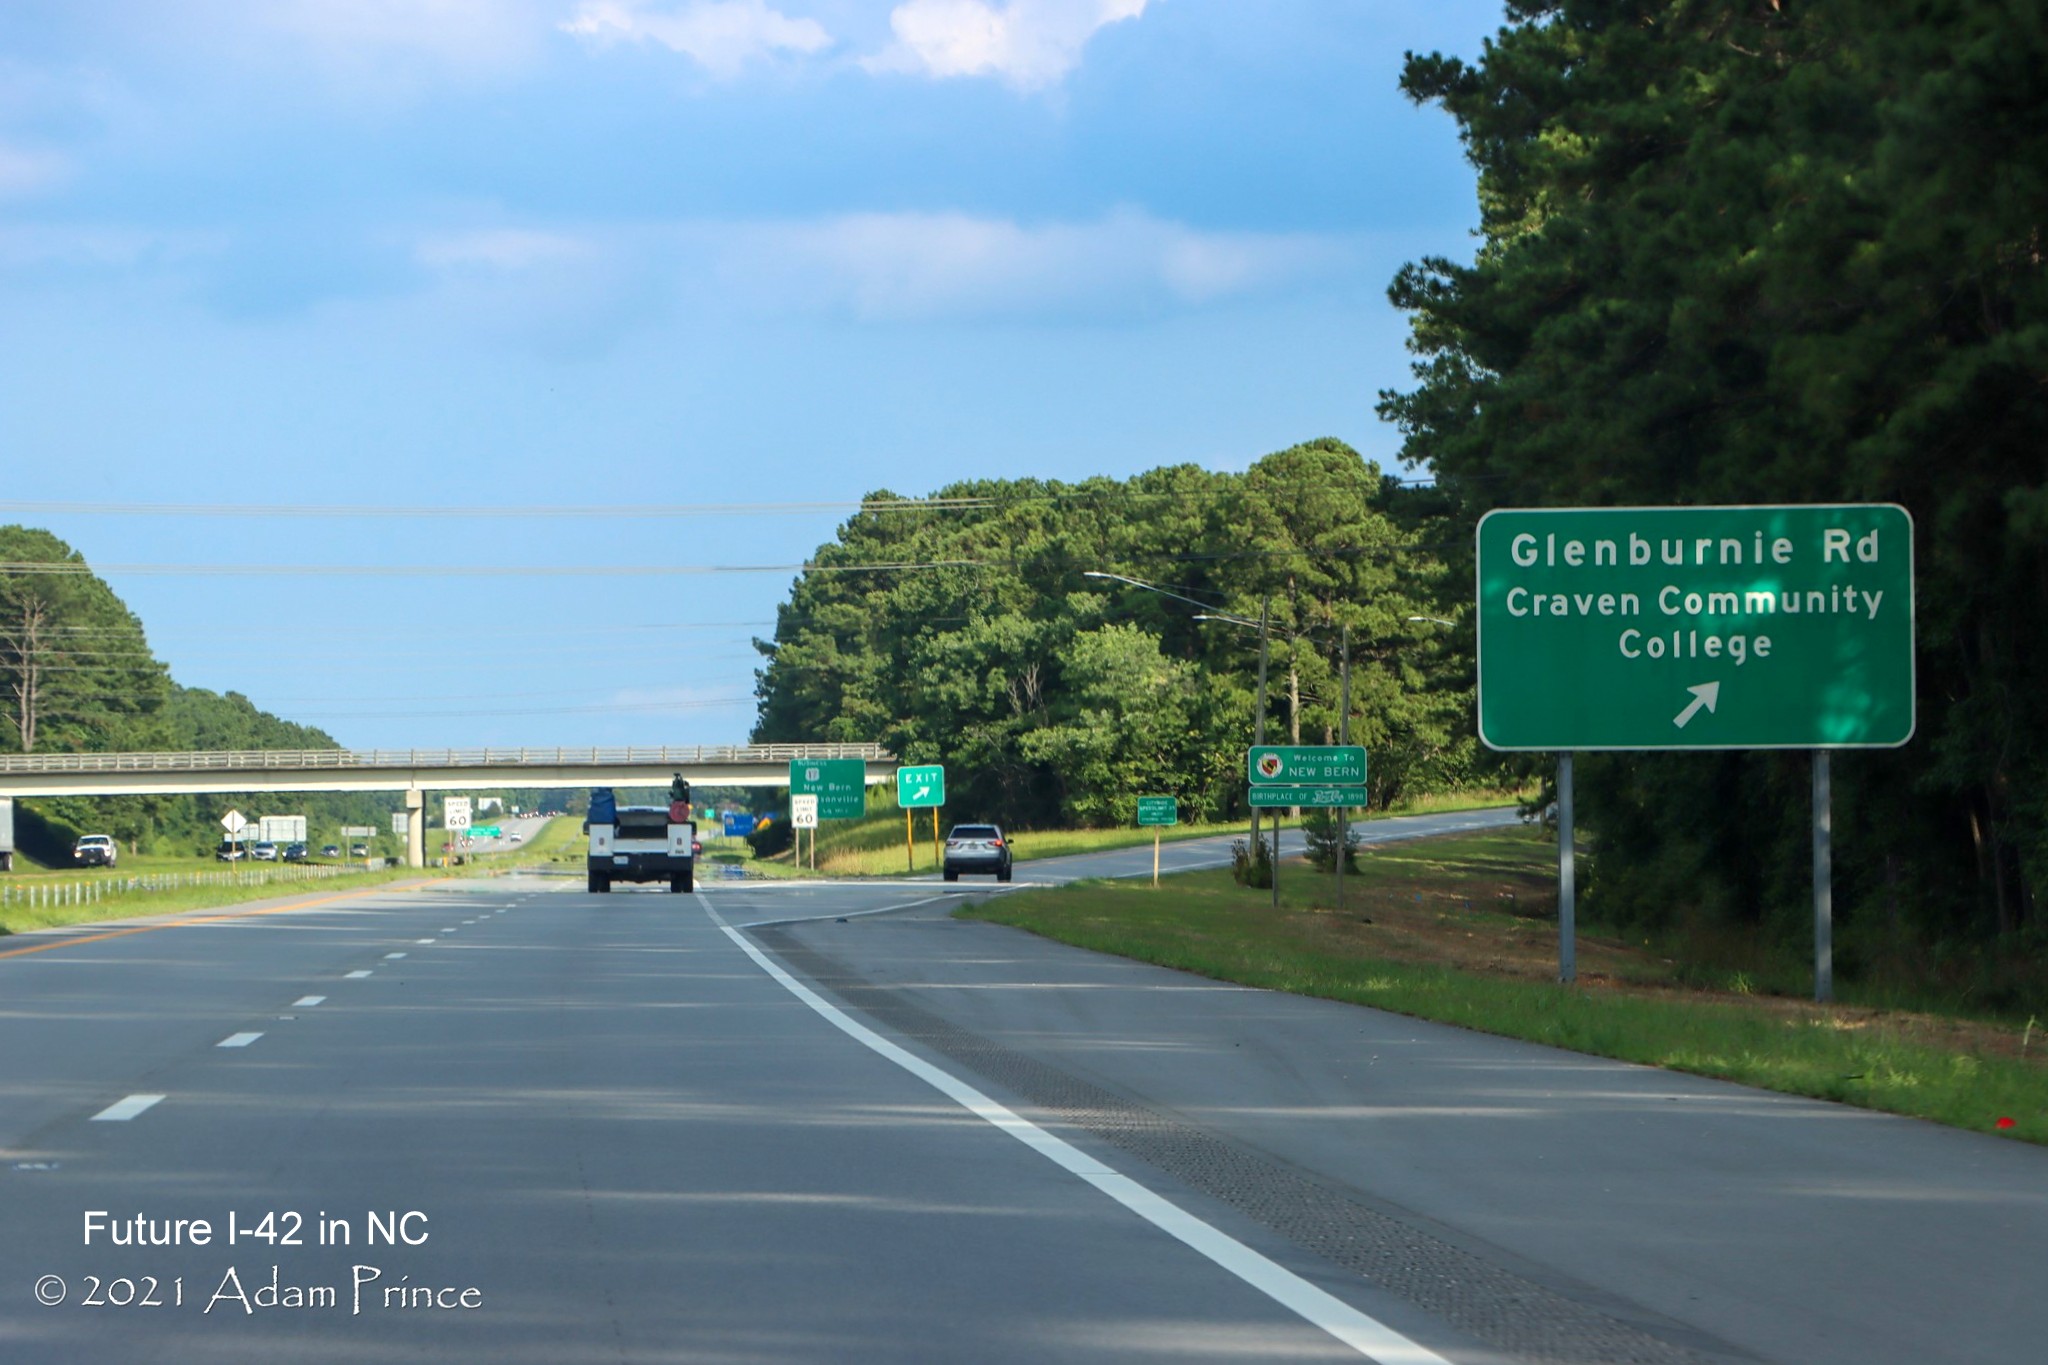 Image of Craven Community College exit sign along newly widened right shoulder of US 70 (Future I-42) East in Craven County, photo by Adam Prince, July 2021